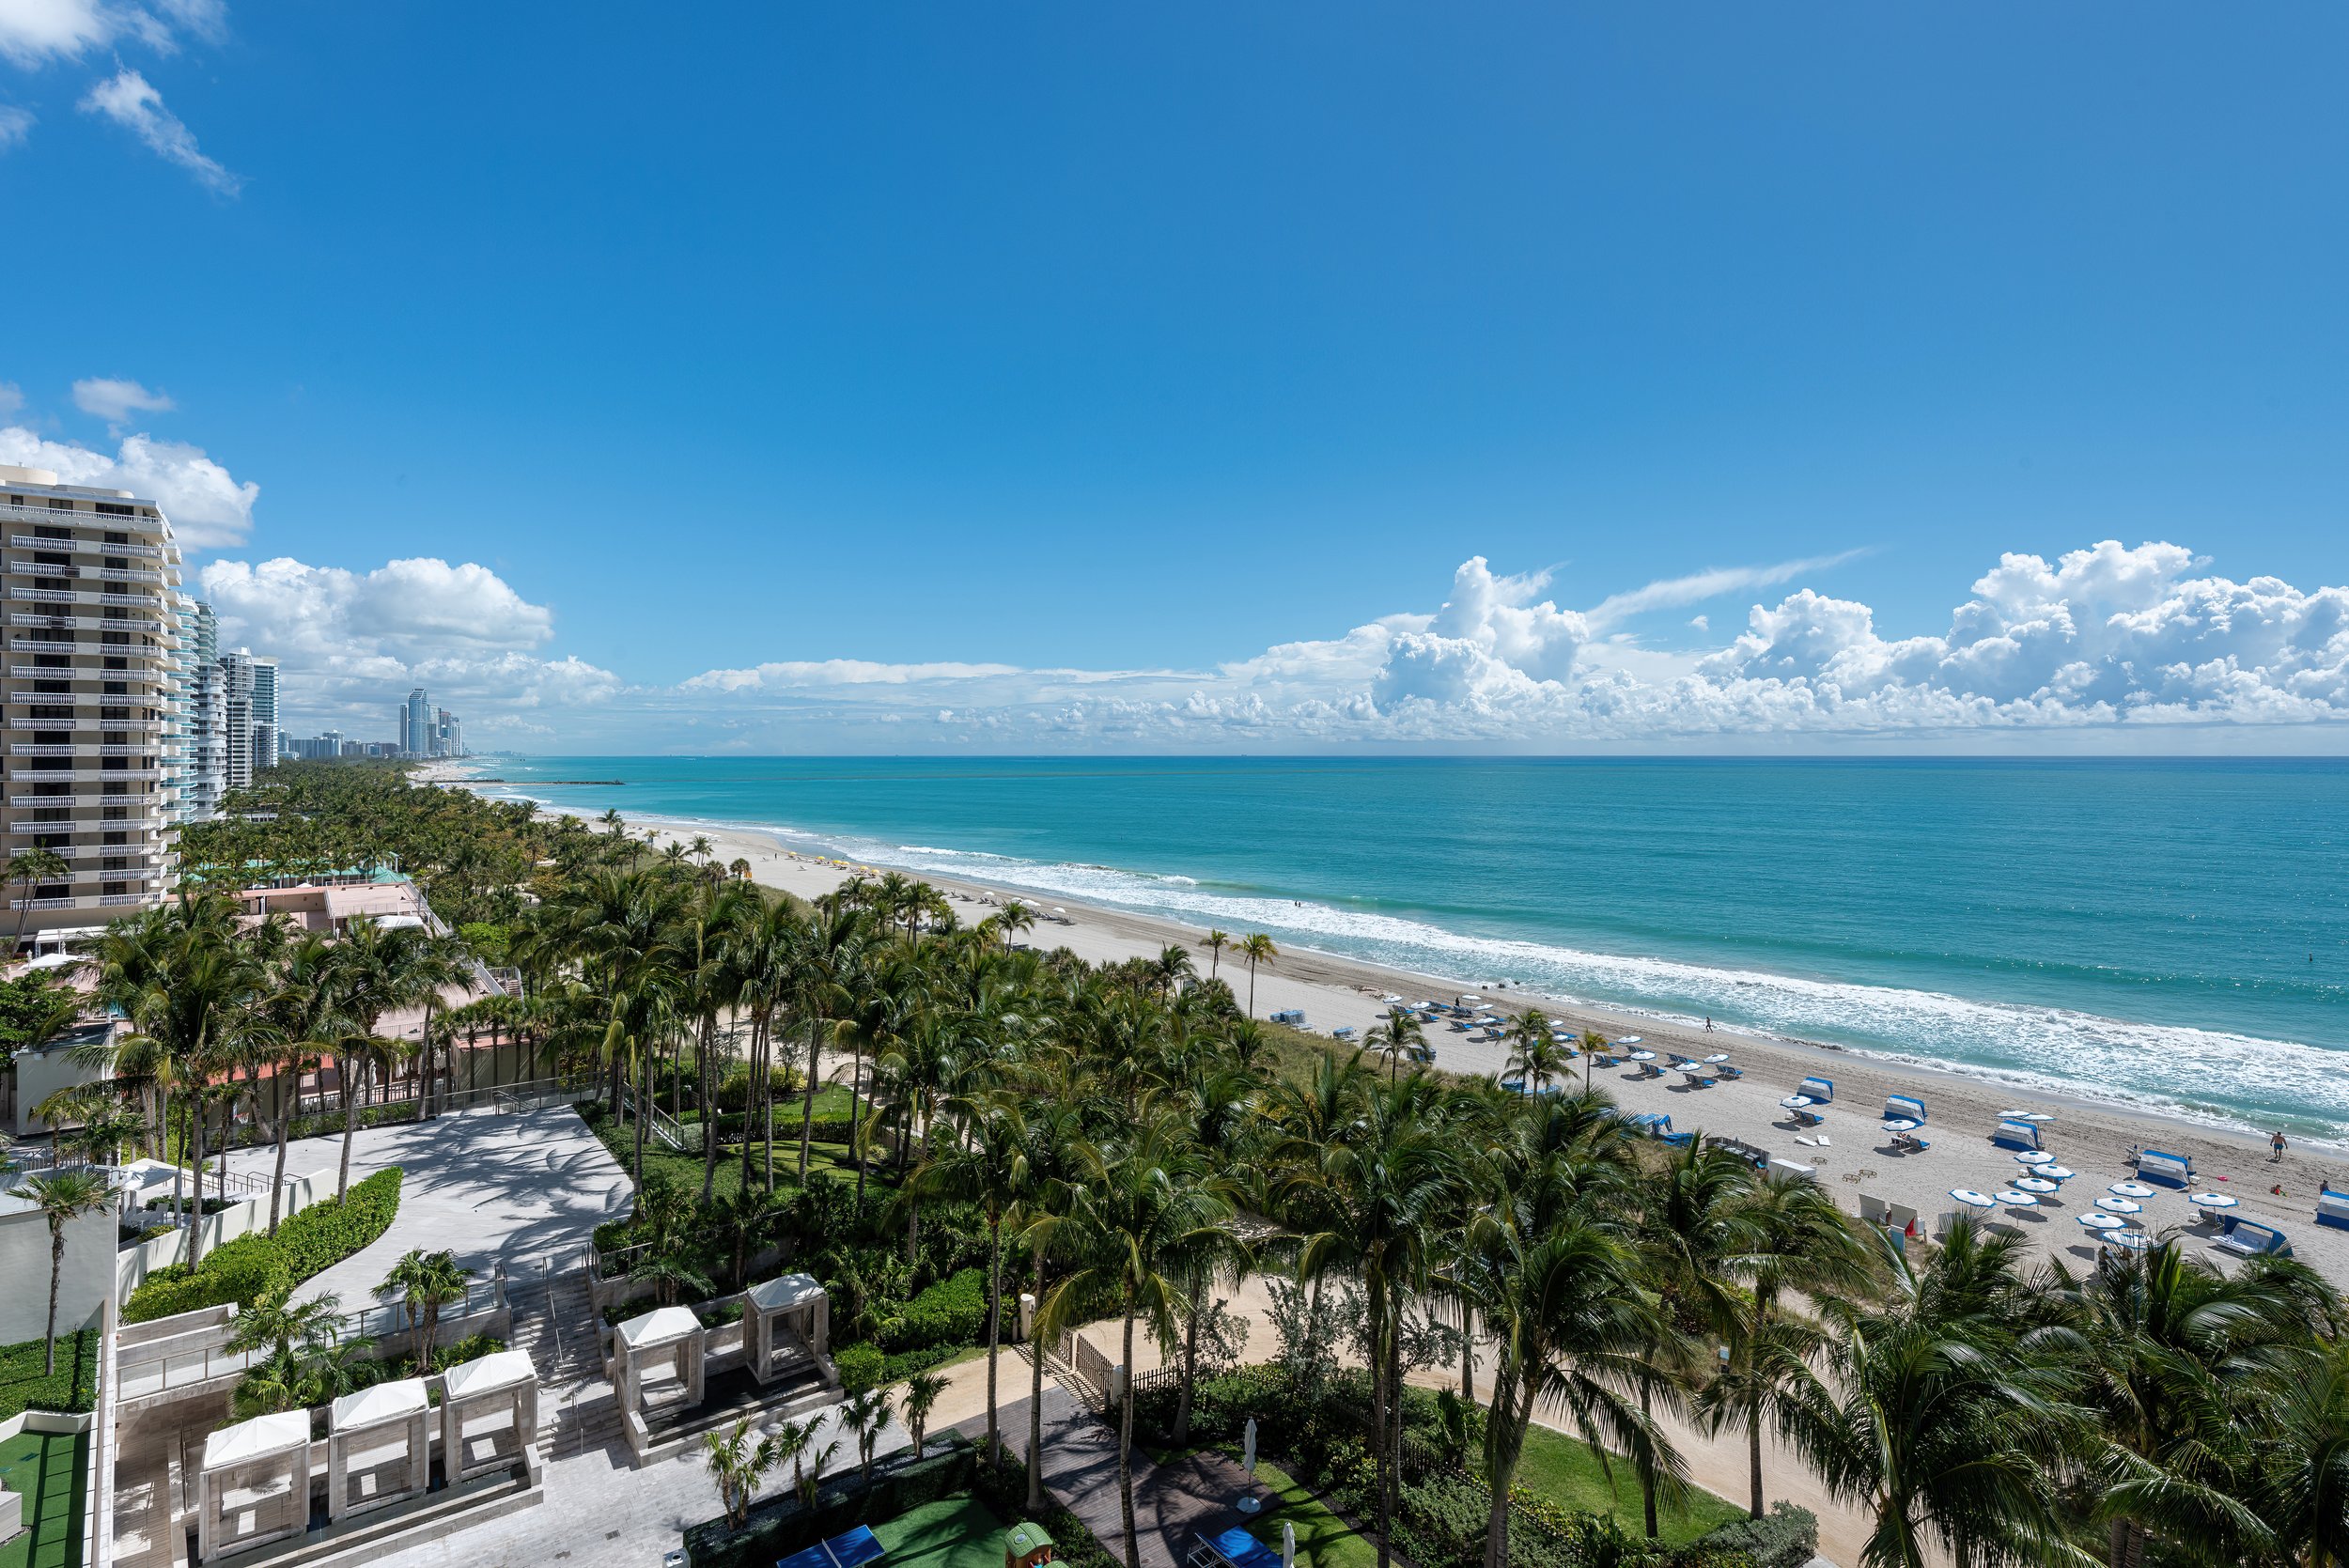 Master Brokers Forum Listing: See The Views From This Beachfront Condo In St. Regis Bal Harbour Asking $10.995 Million 6.JPG